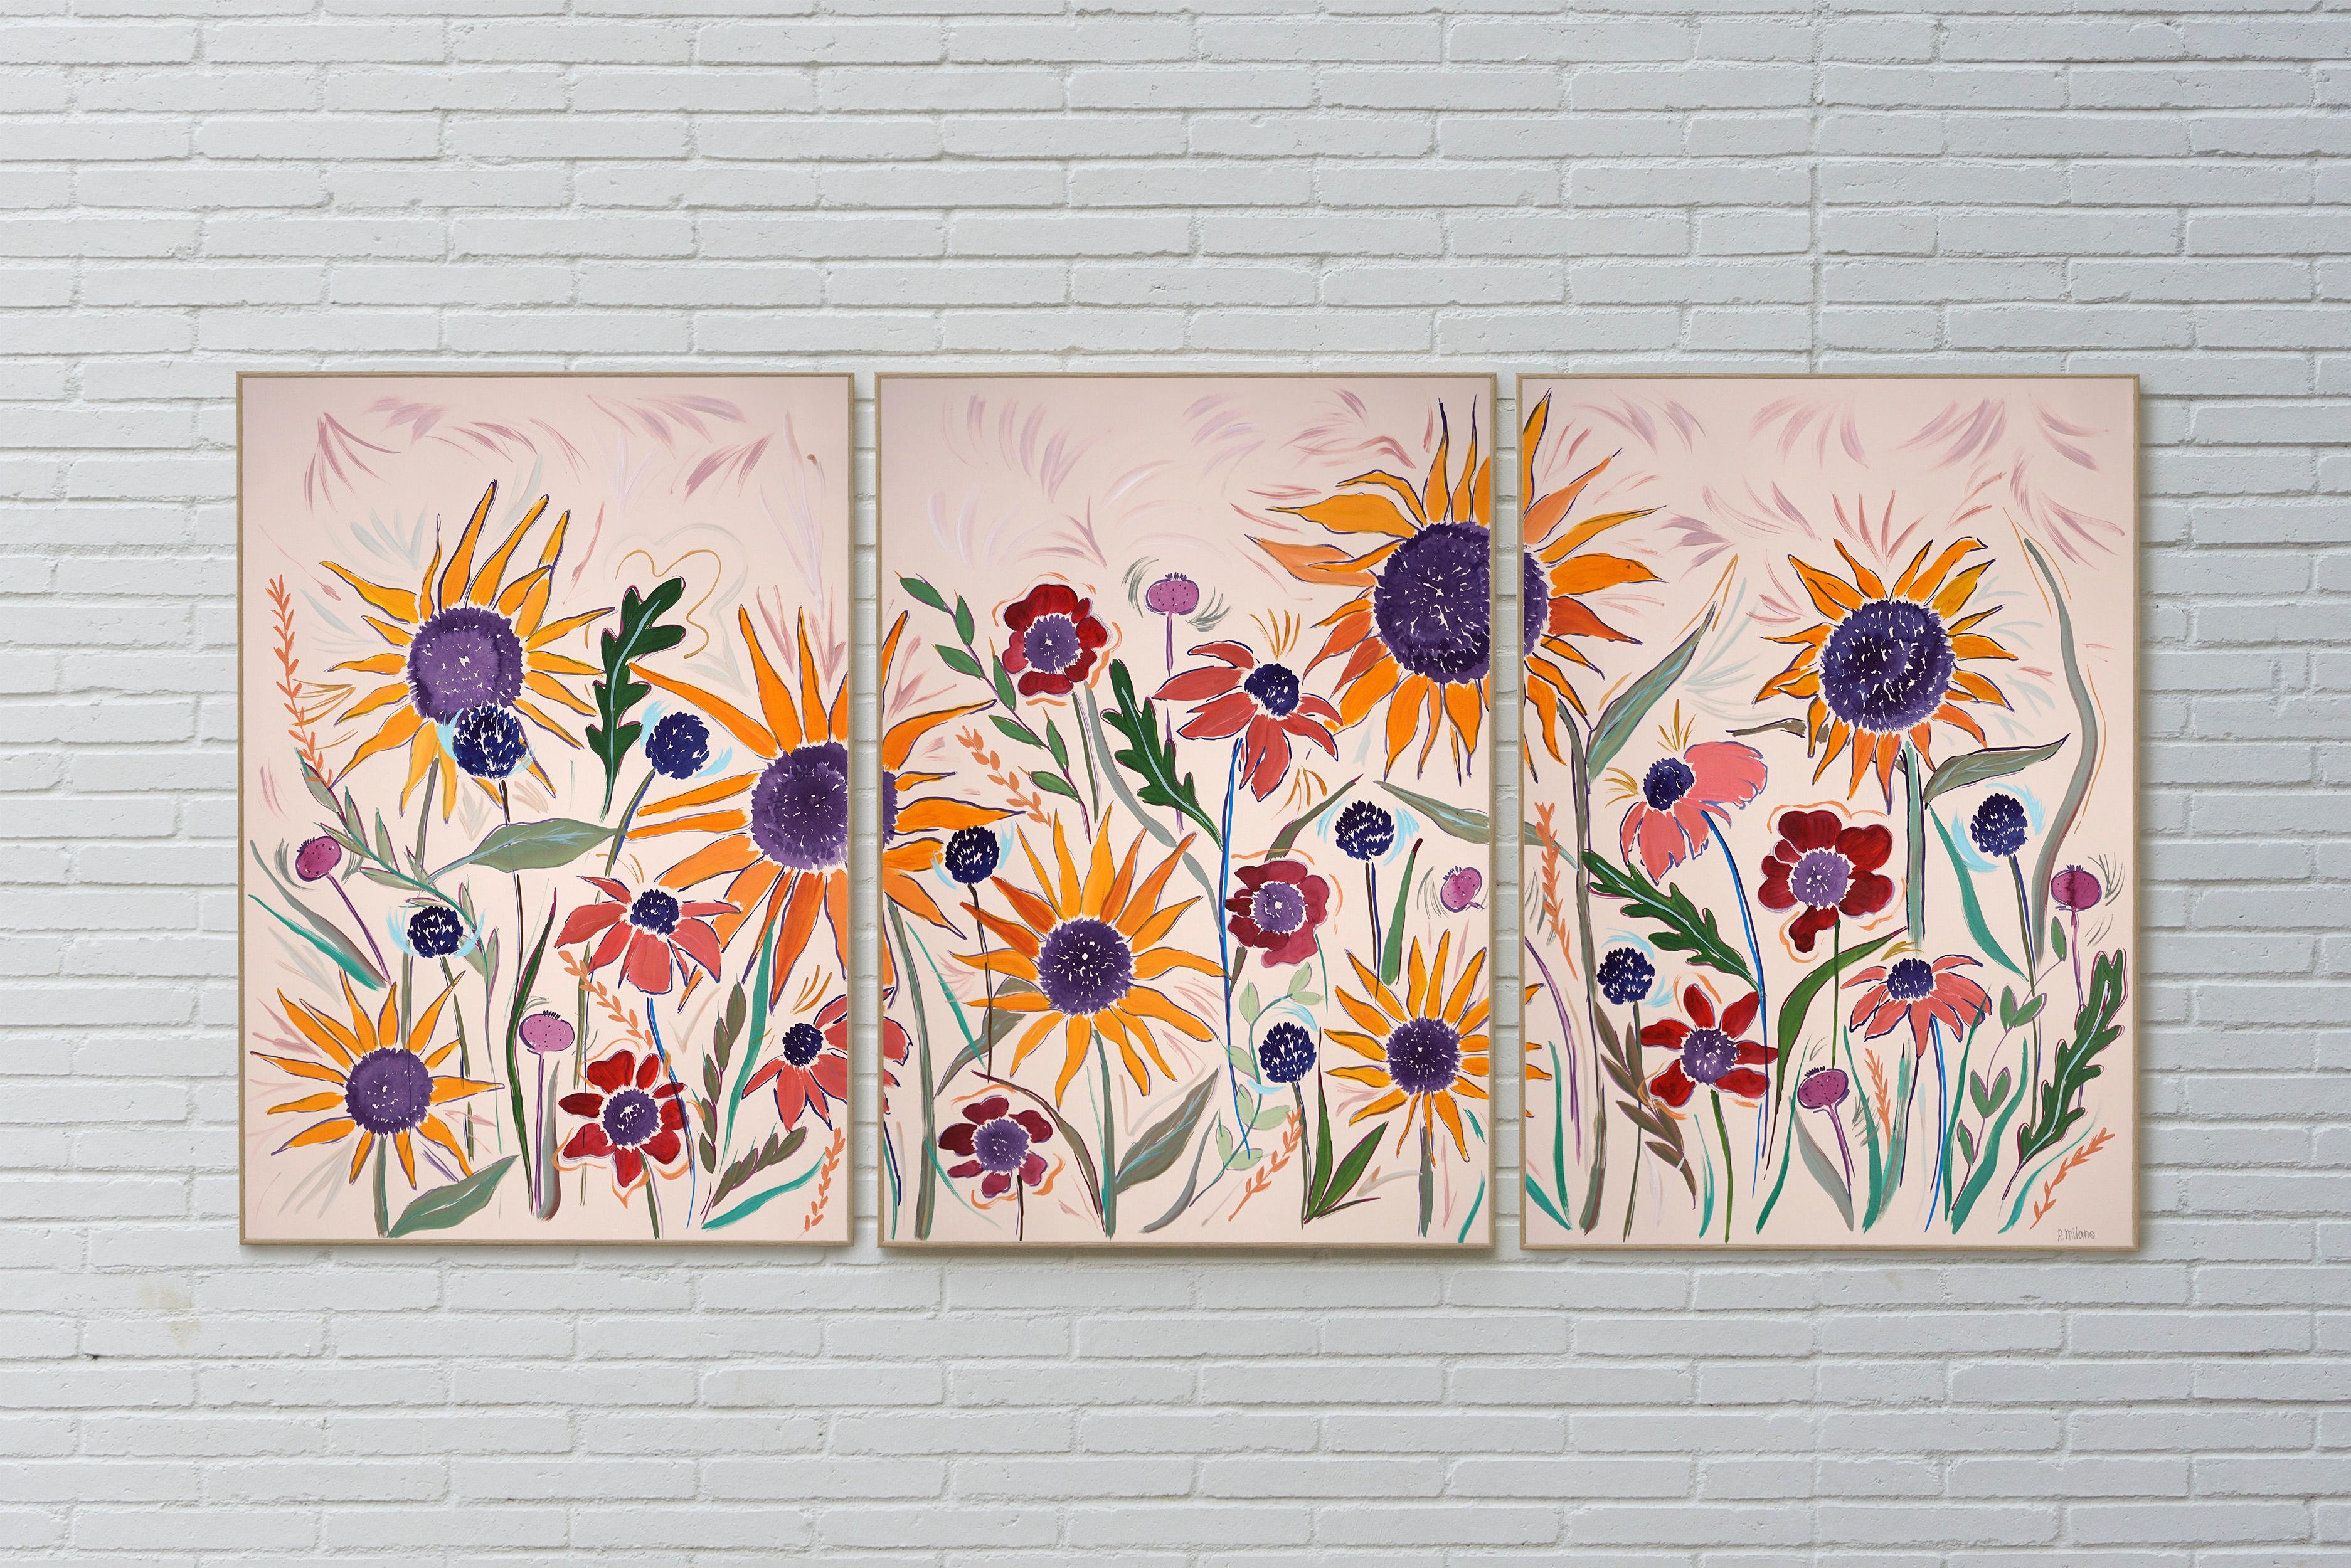 Sunflower Panorama Triptych, Large Countryside Flowers, Yellow Wild Margaritas - Painting by Romina Milano